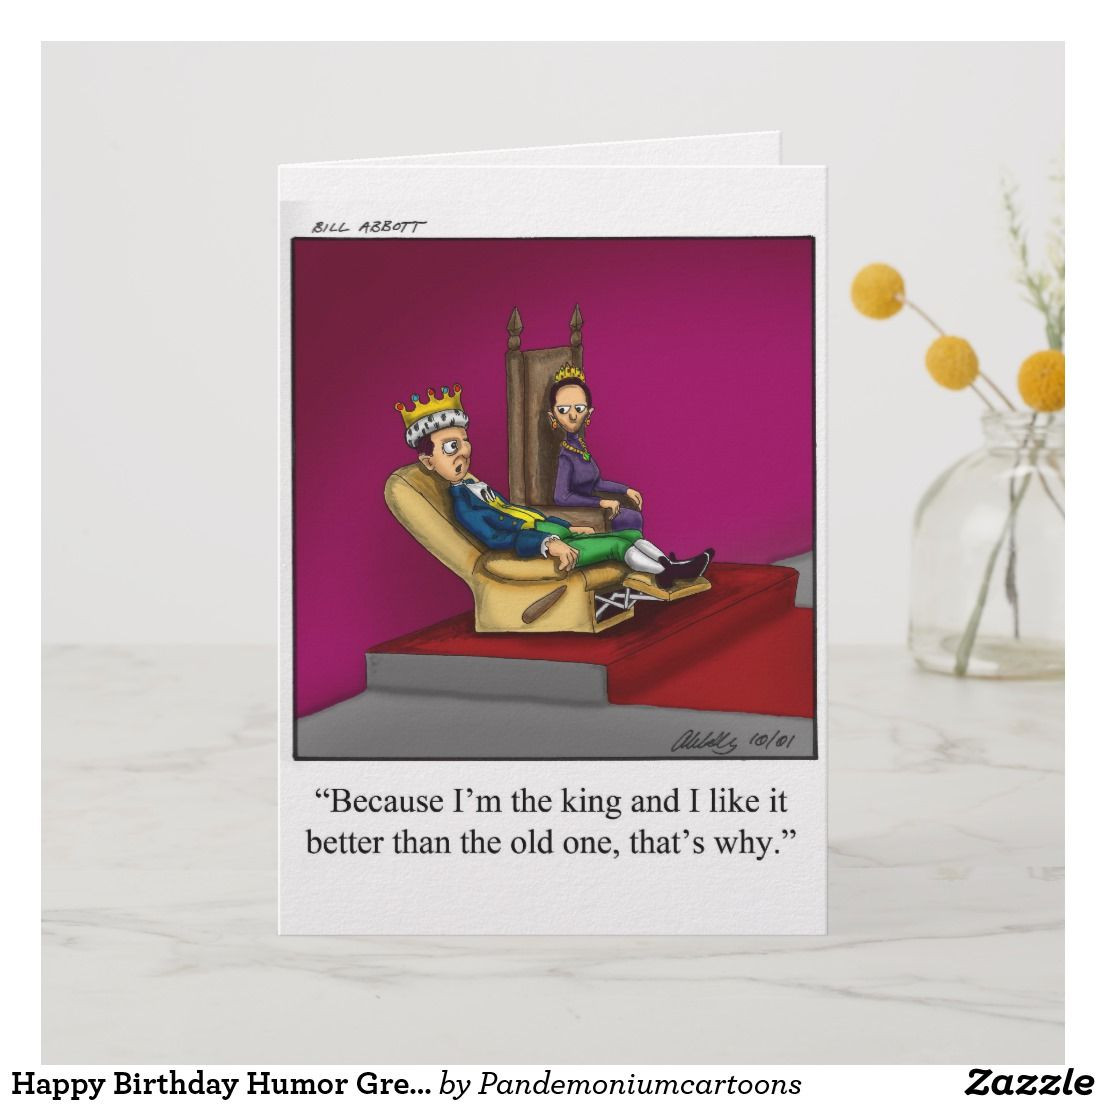 Happy Birthday Cards For Him Funny
 Happy Birthday Humor Greeting Card for Him